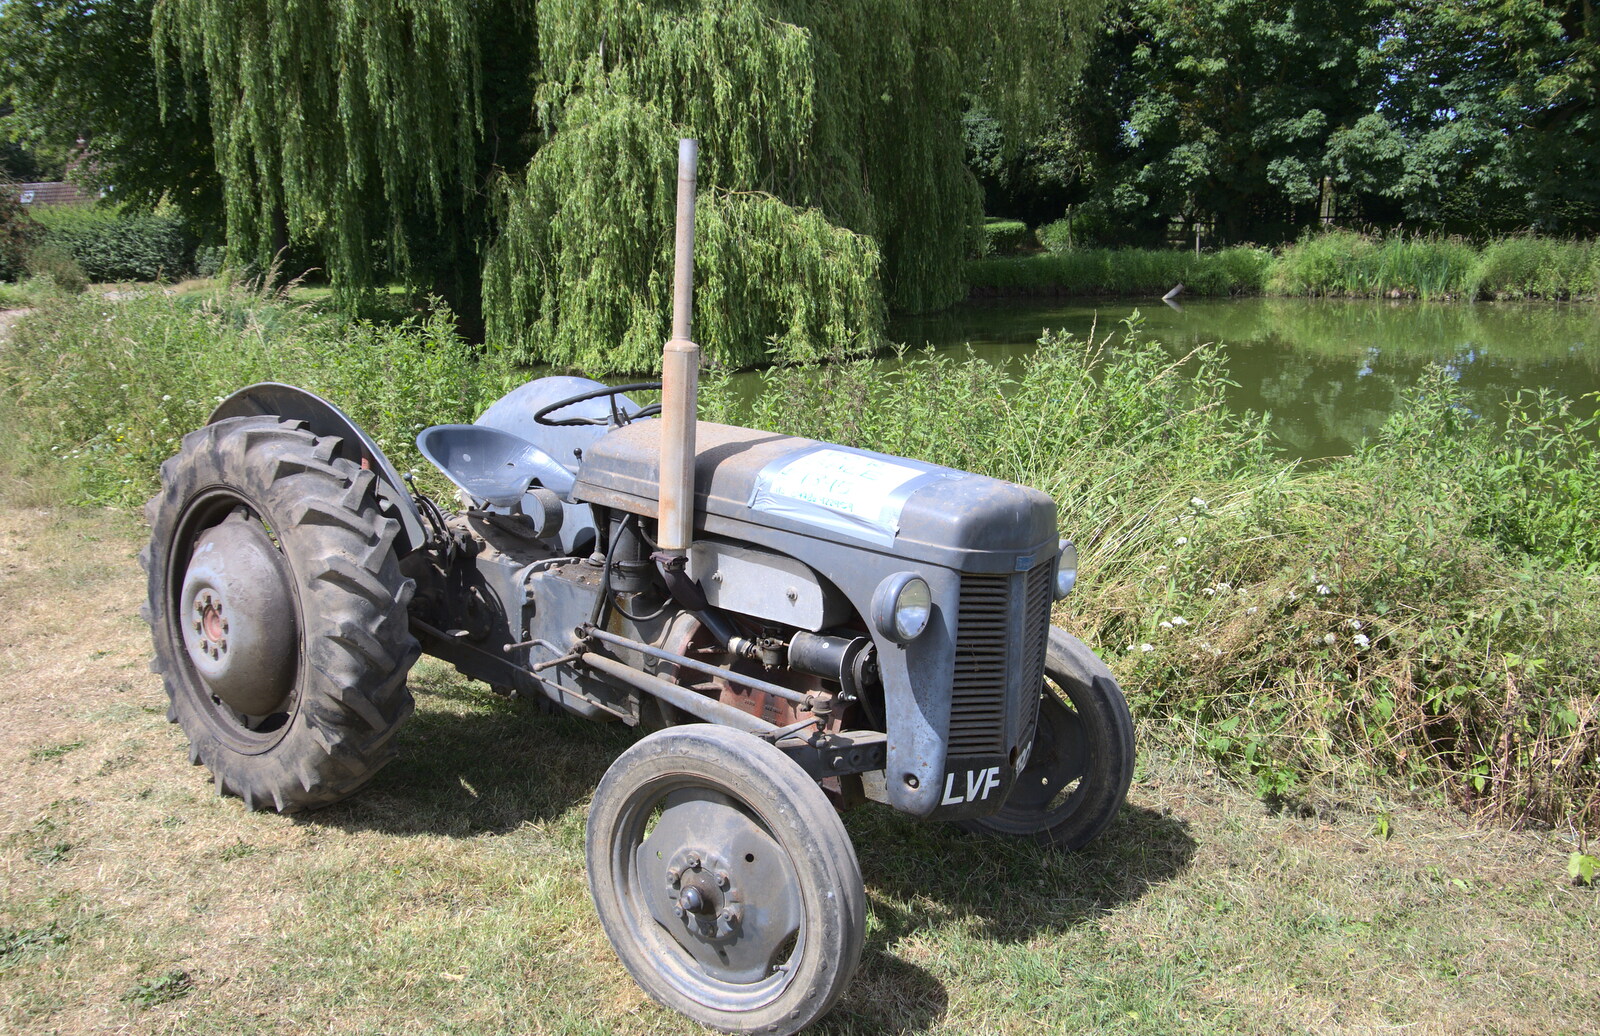 An old Fergie TE20 is up for sale from A Village Hog Roast, Little Green, Thrandeston, Suffolk - 24th June 2018